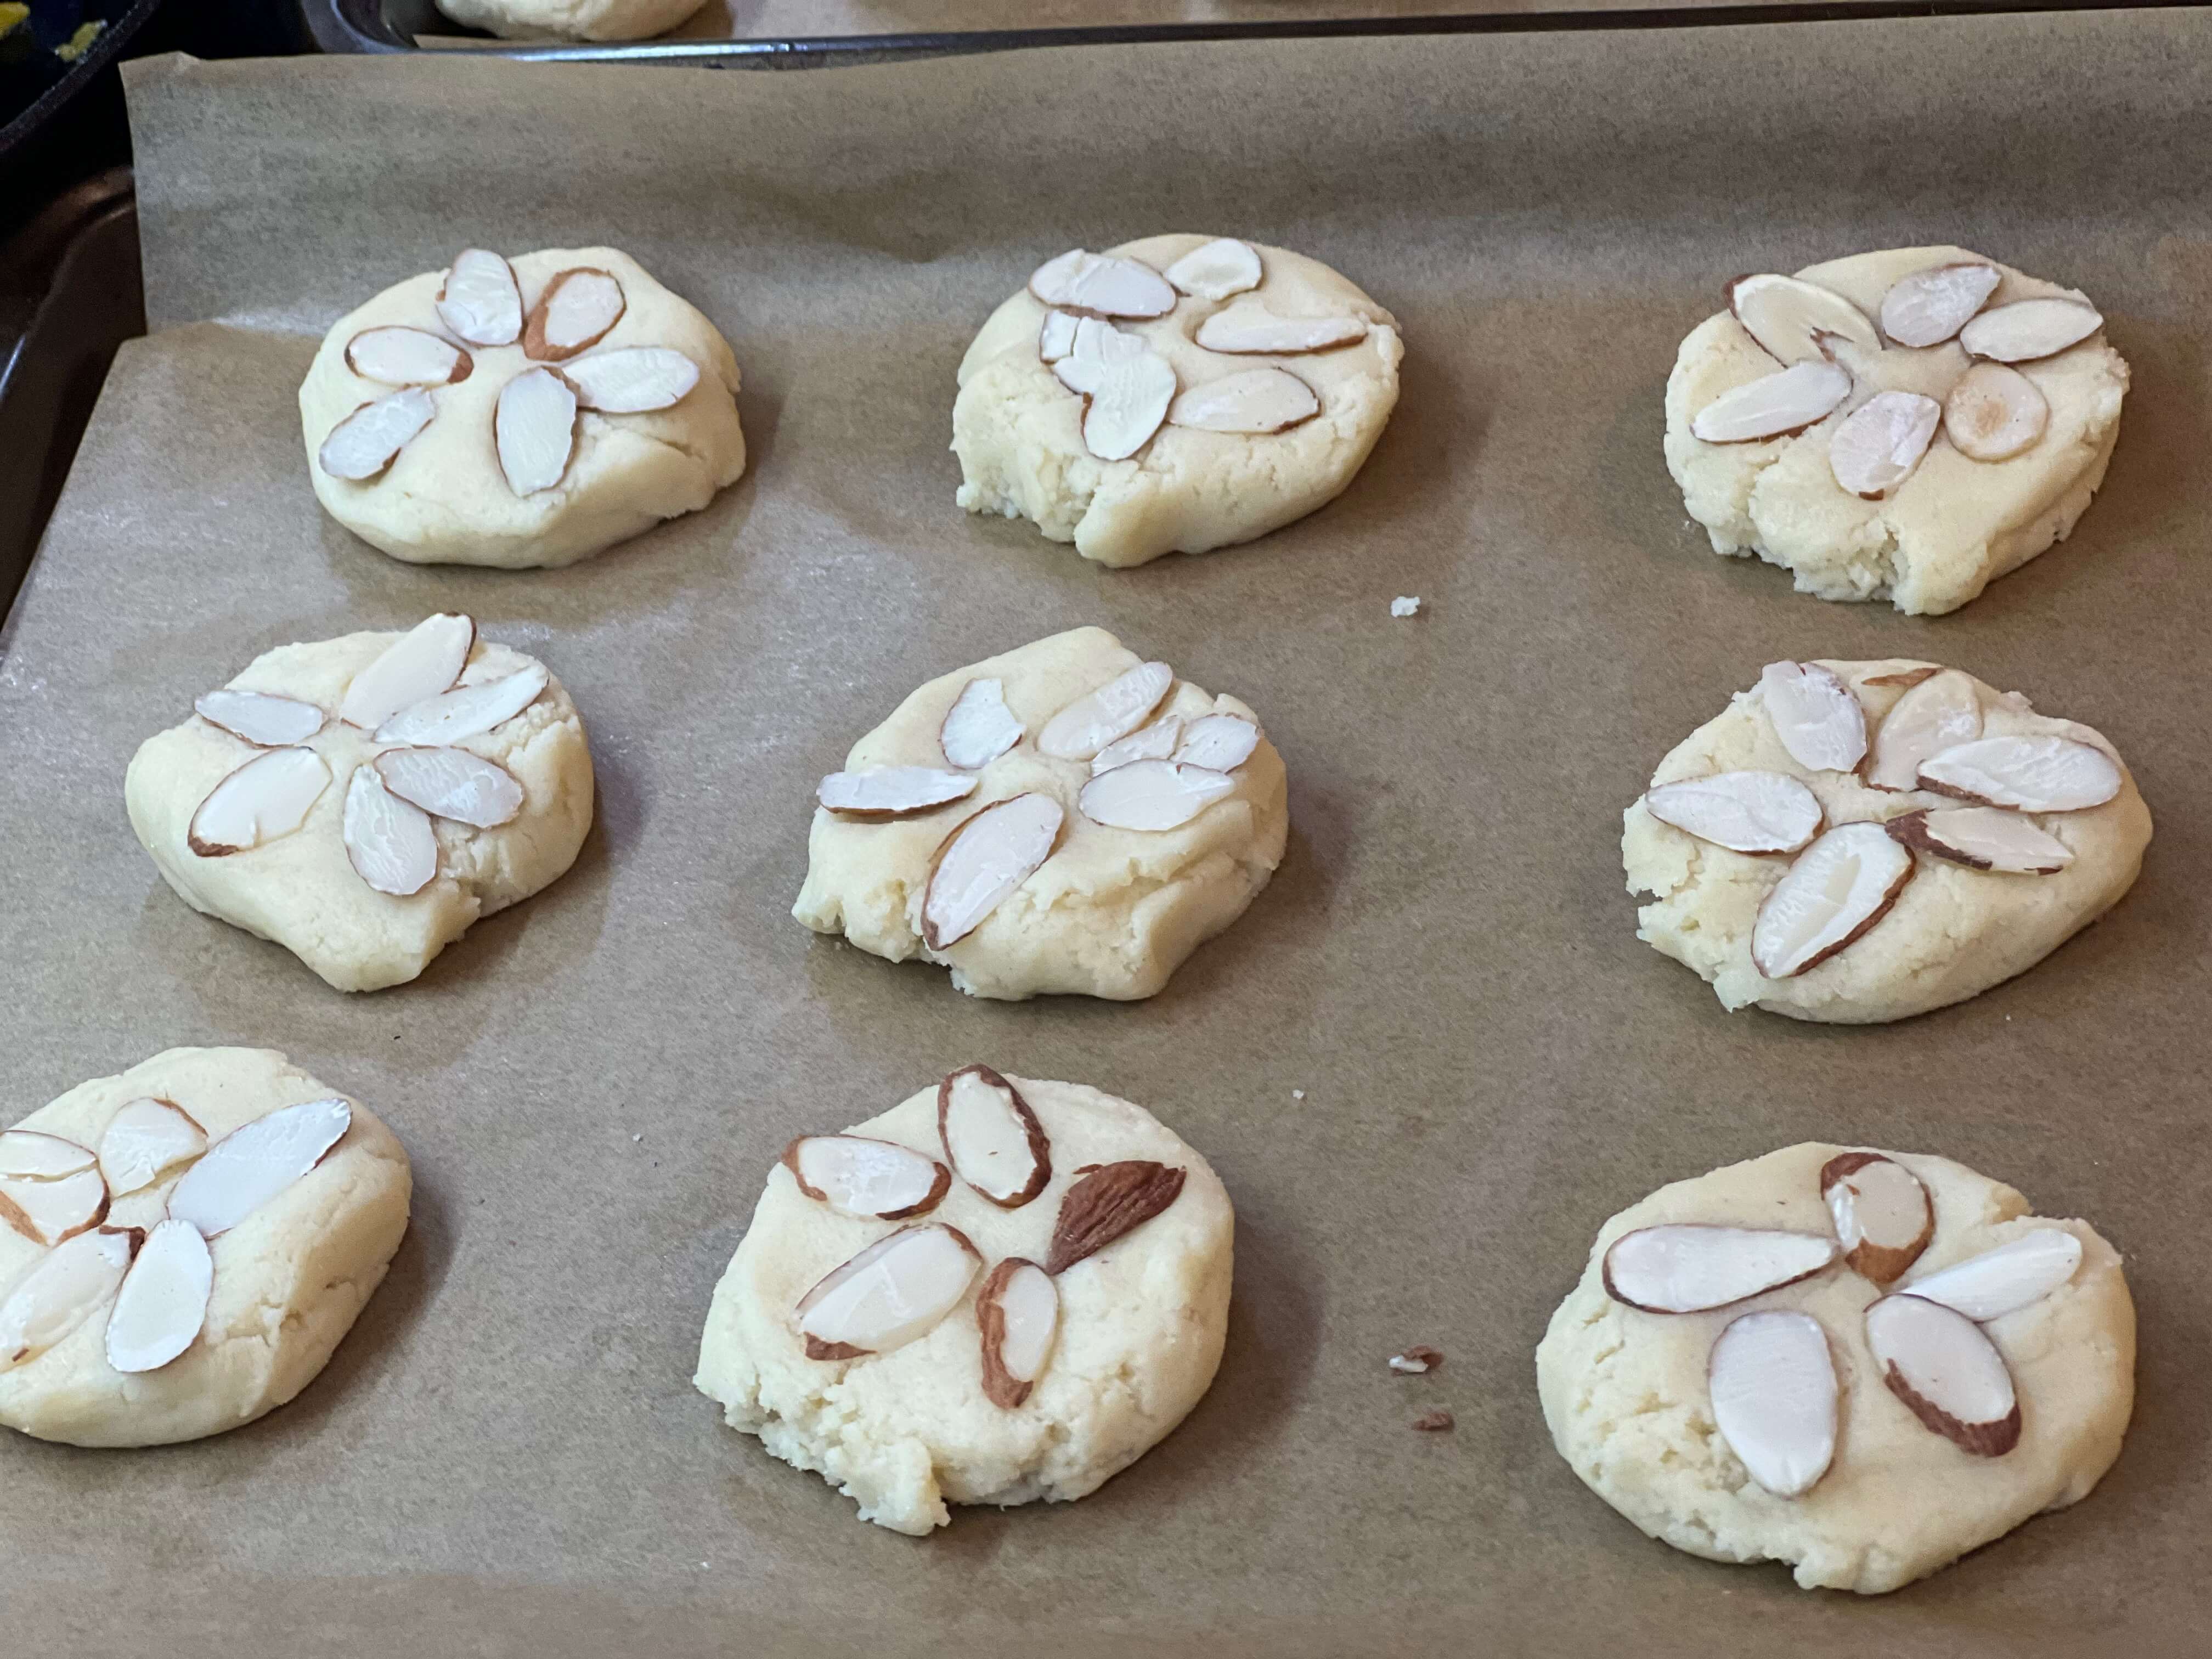 Place slivered almonds on tops of the pressed down cookie dough.